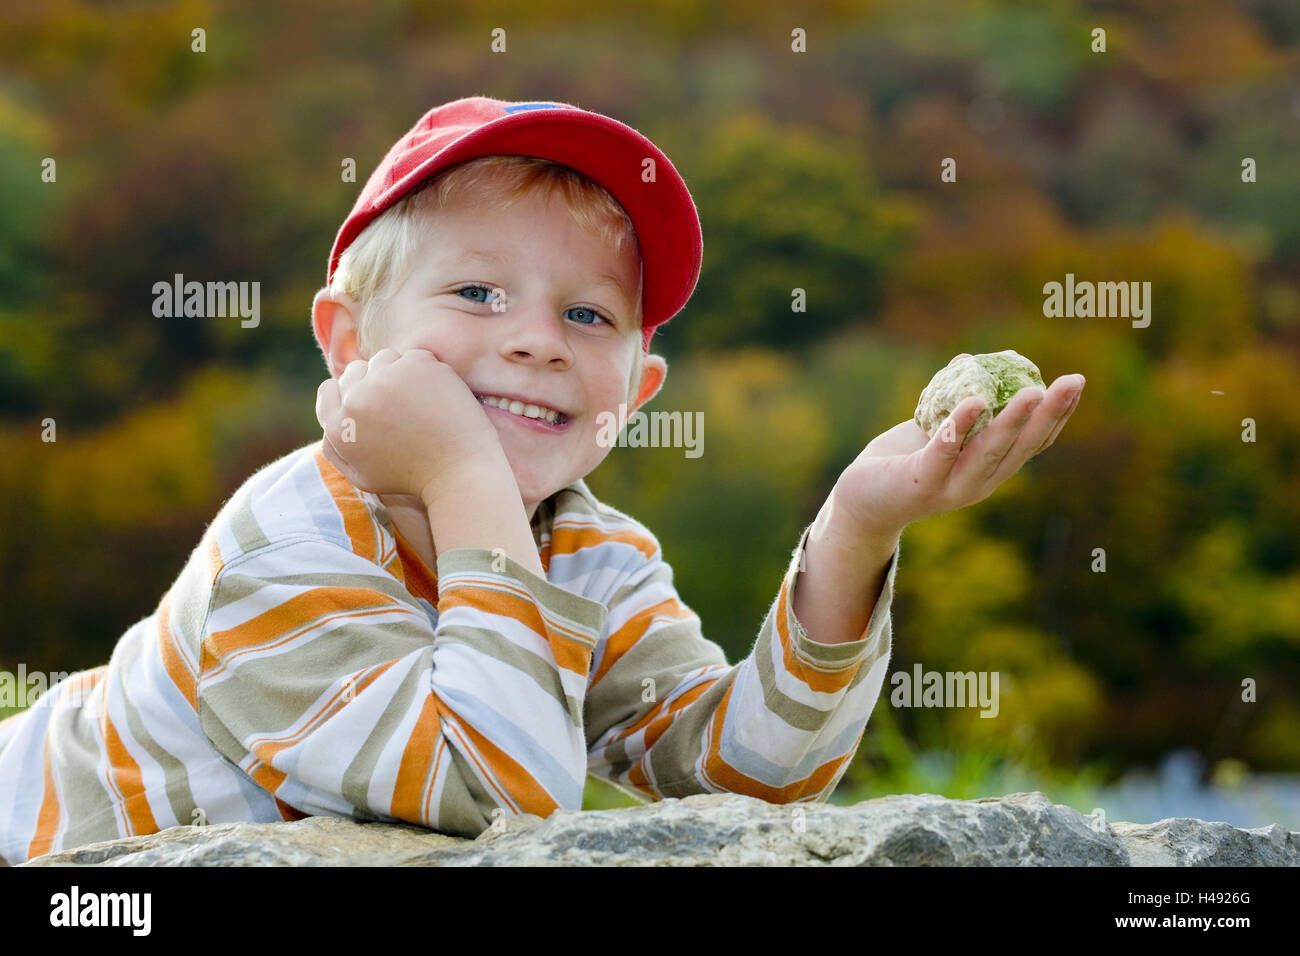 Boy, sign cap, hand, stone, hold, smile, portrait, model released, people, child, blond, head, rock, hand, add support, leisure time, collect, point, cap, baseball cap, red, autumnally, nature, Stock Photo